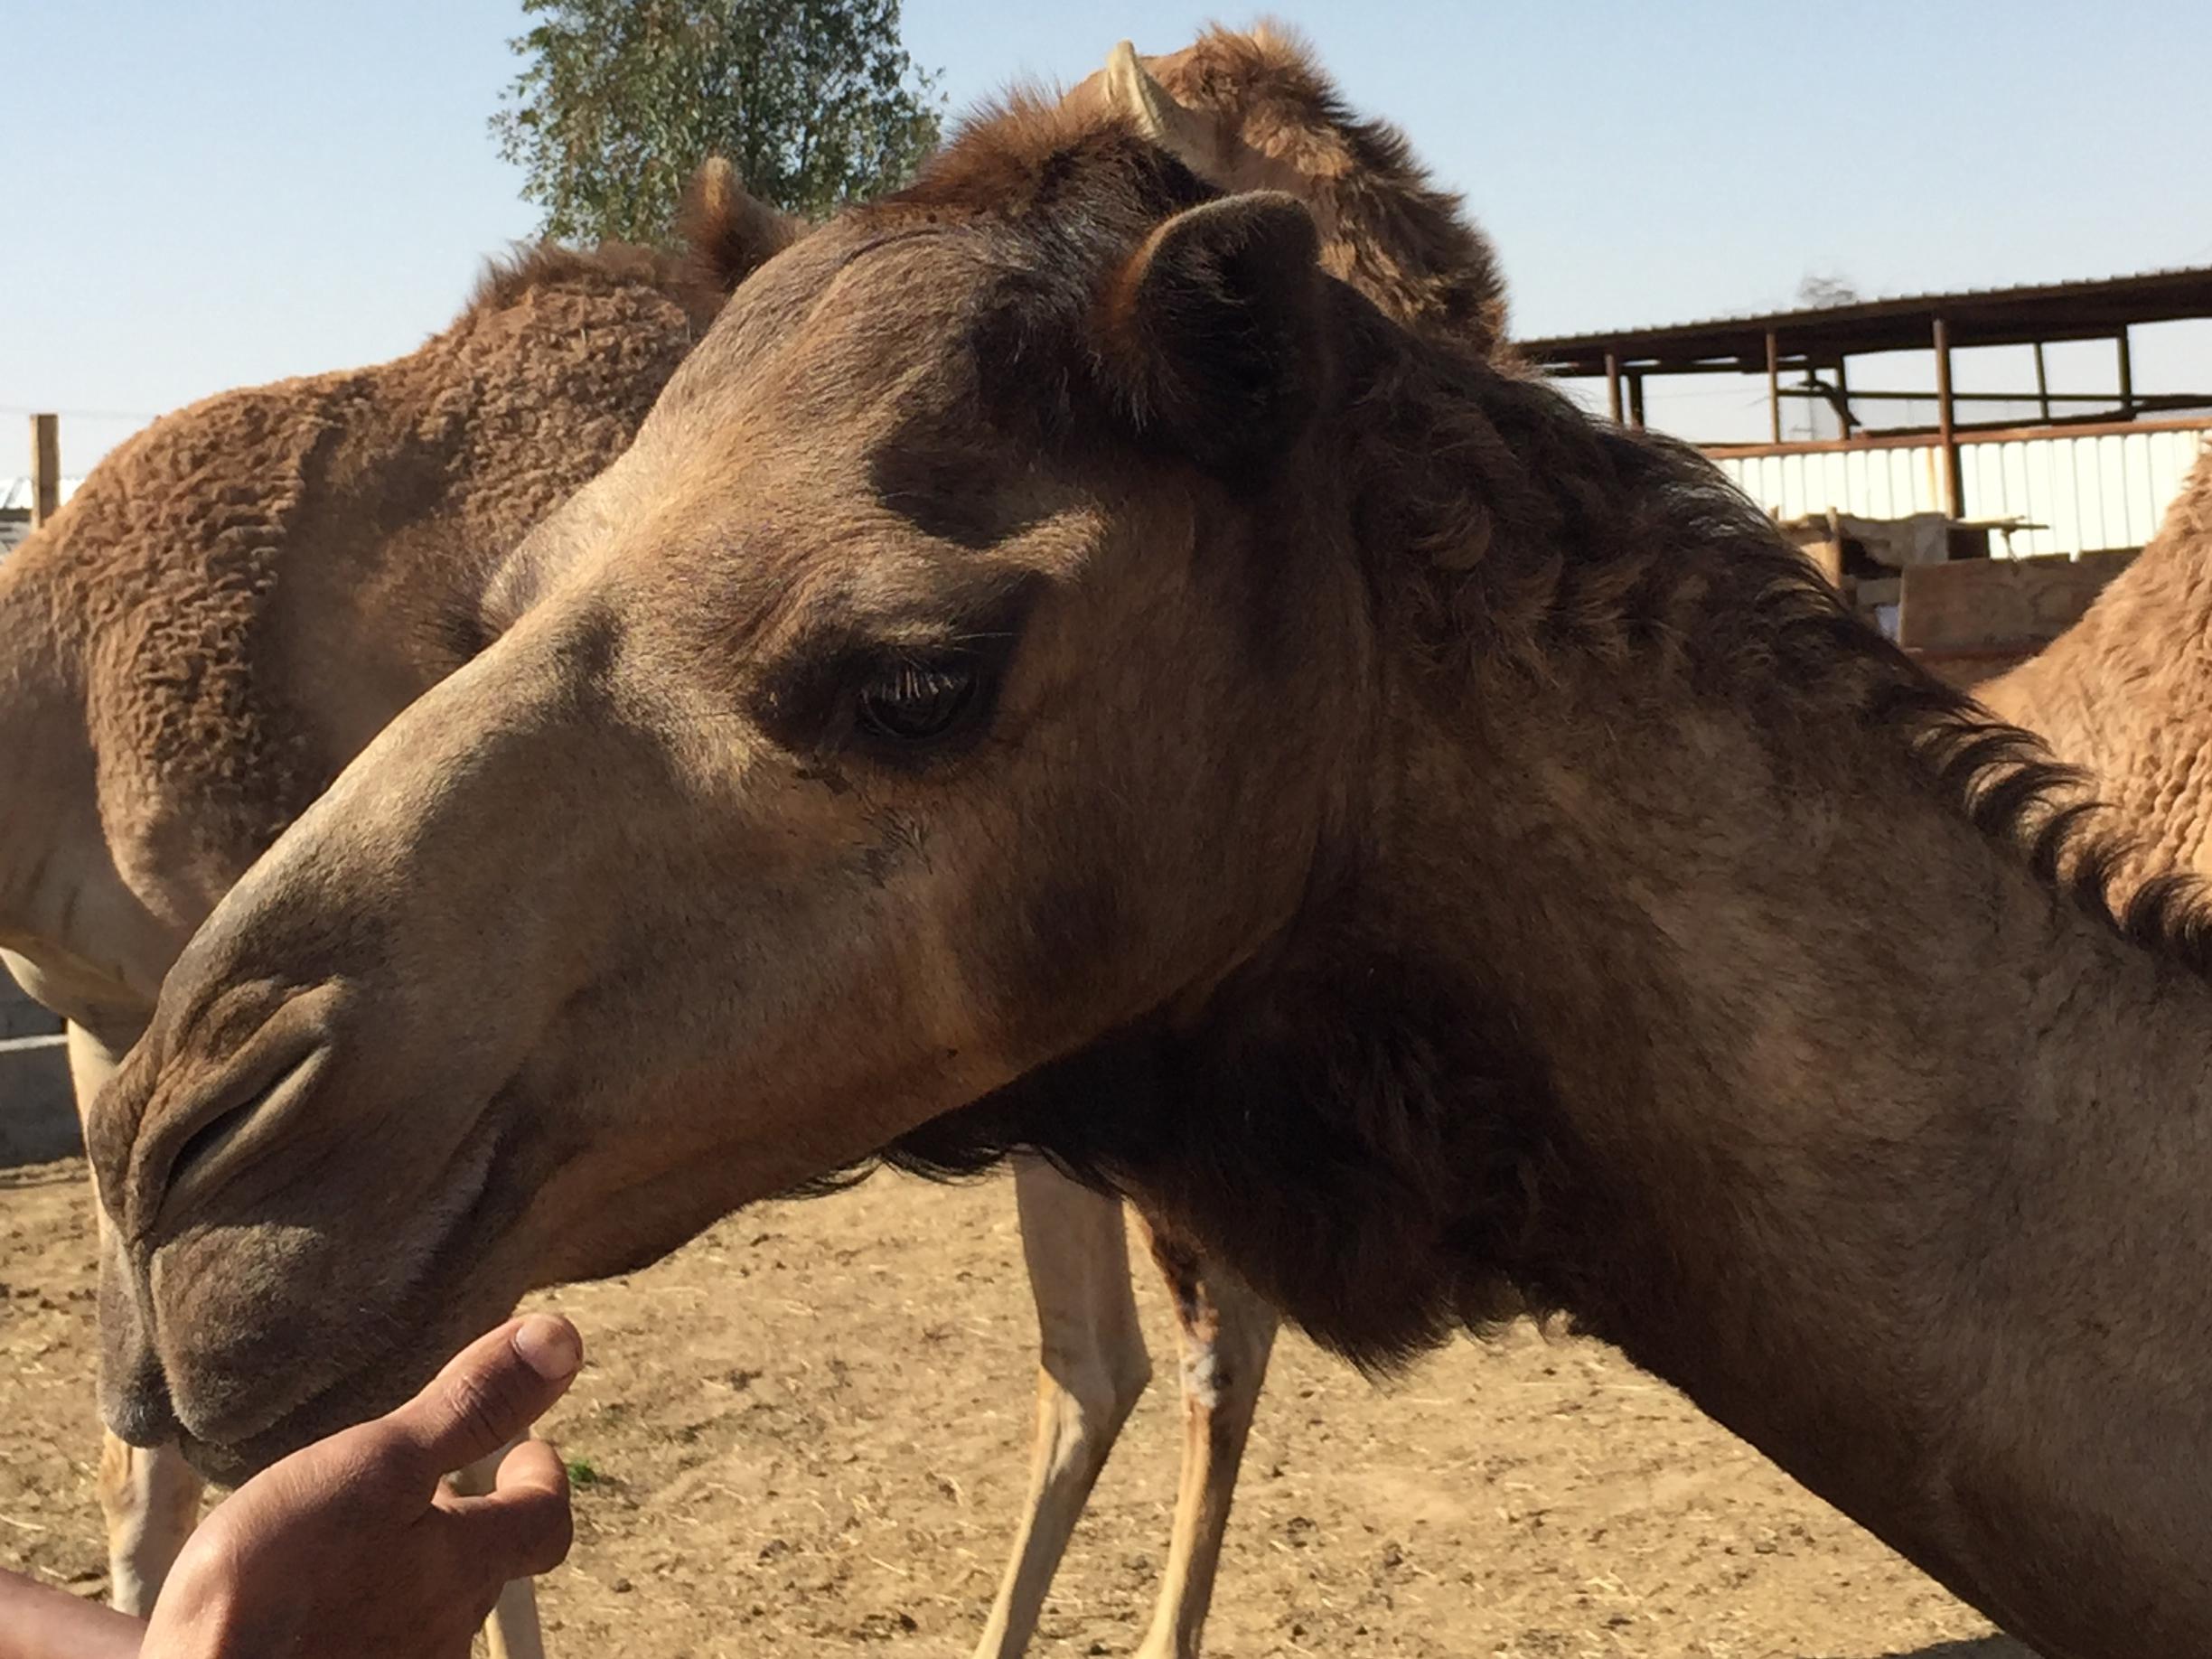 Humans got the MERS virus from camels and the common cold too